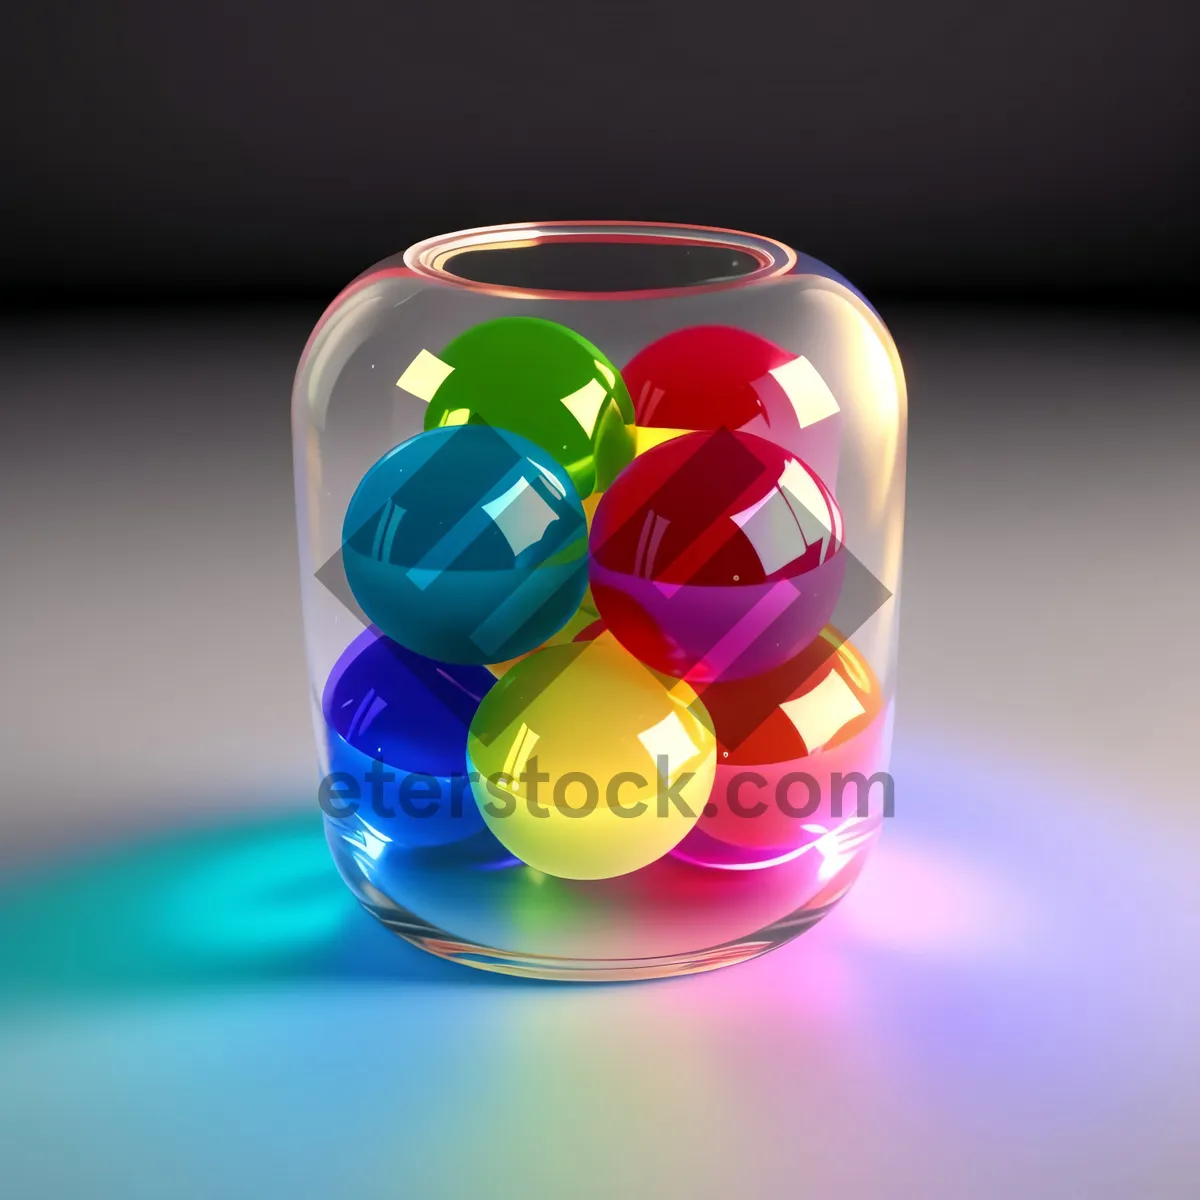 Picture of Vibrant Jelly Ball Fun in Colorful Sphere